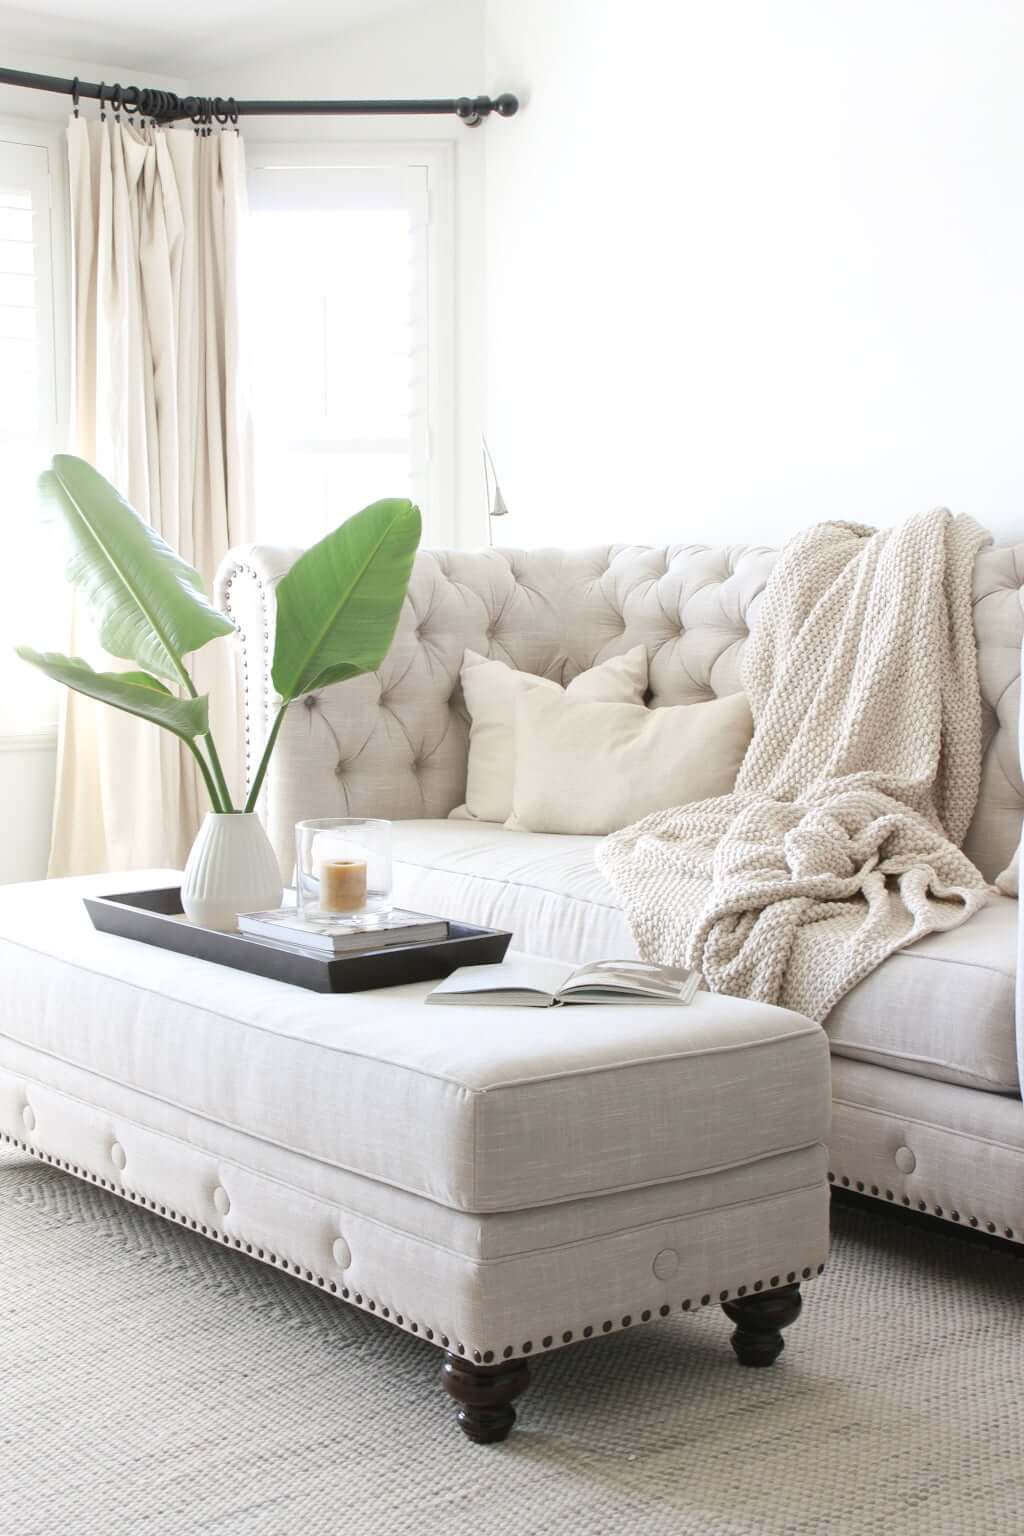 tufted couch with ottoman, ottoman styling with tray and plant